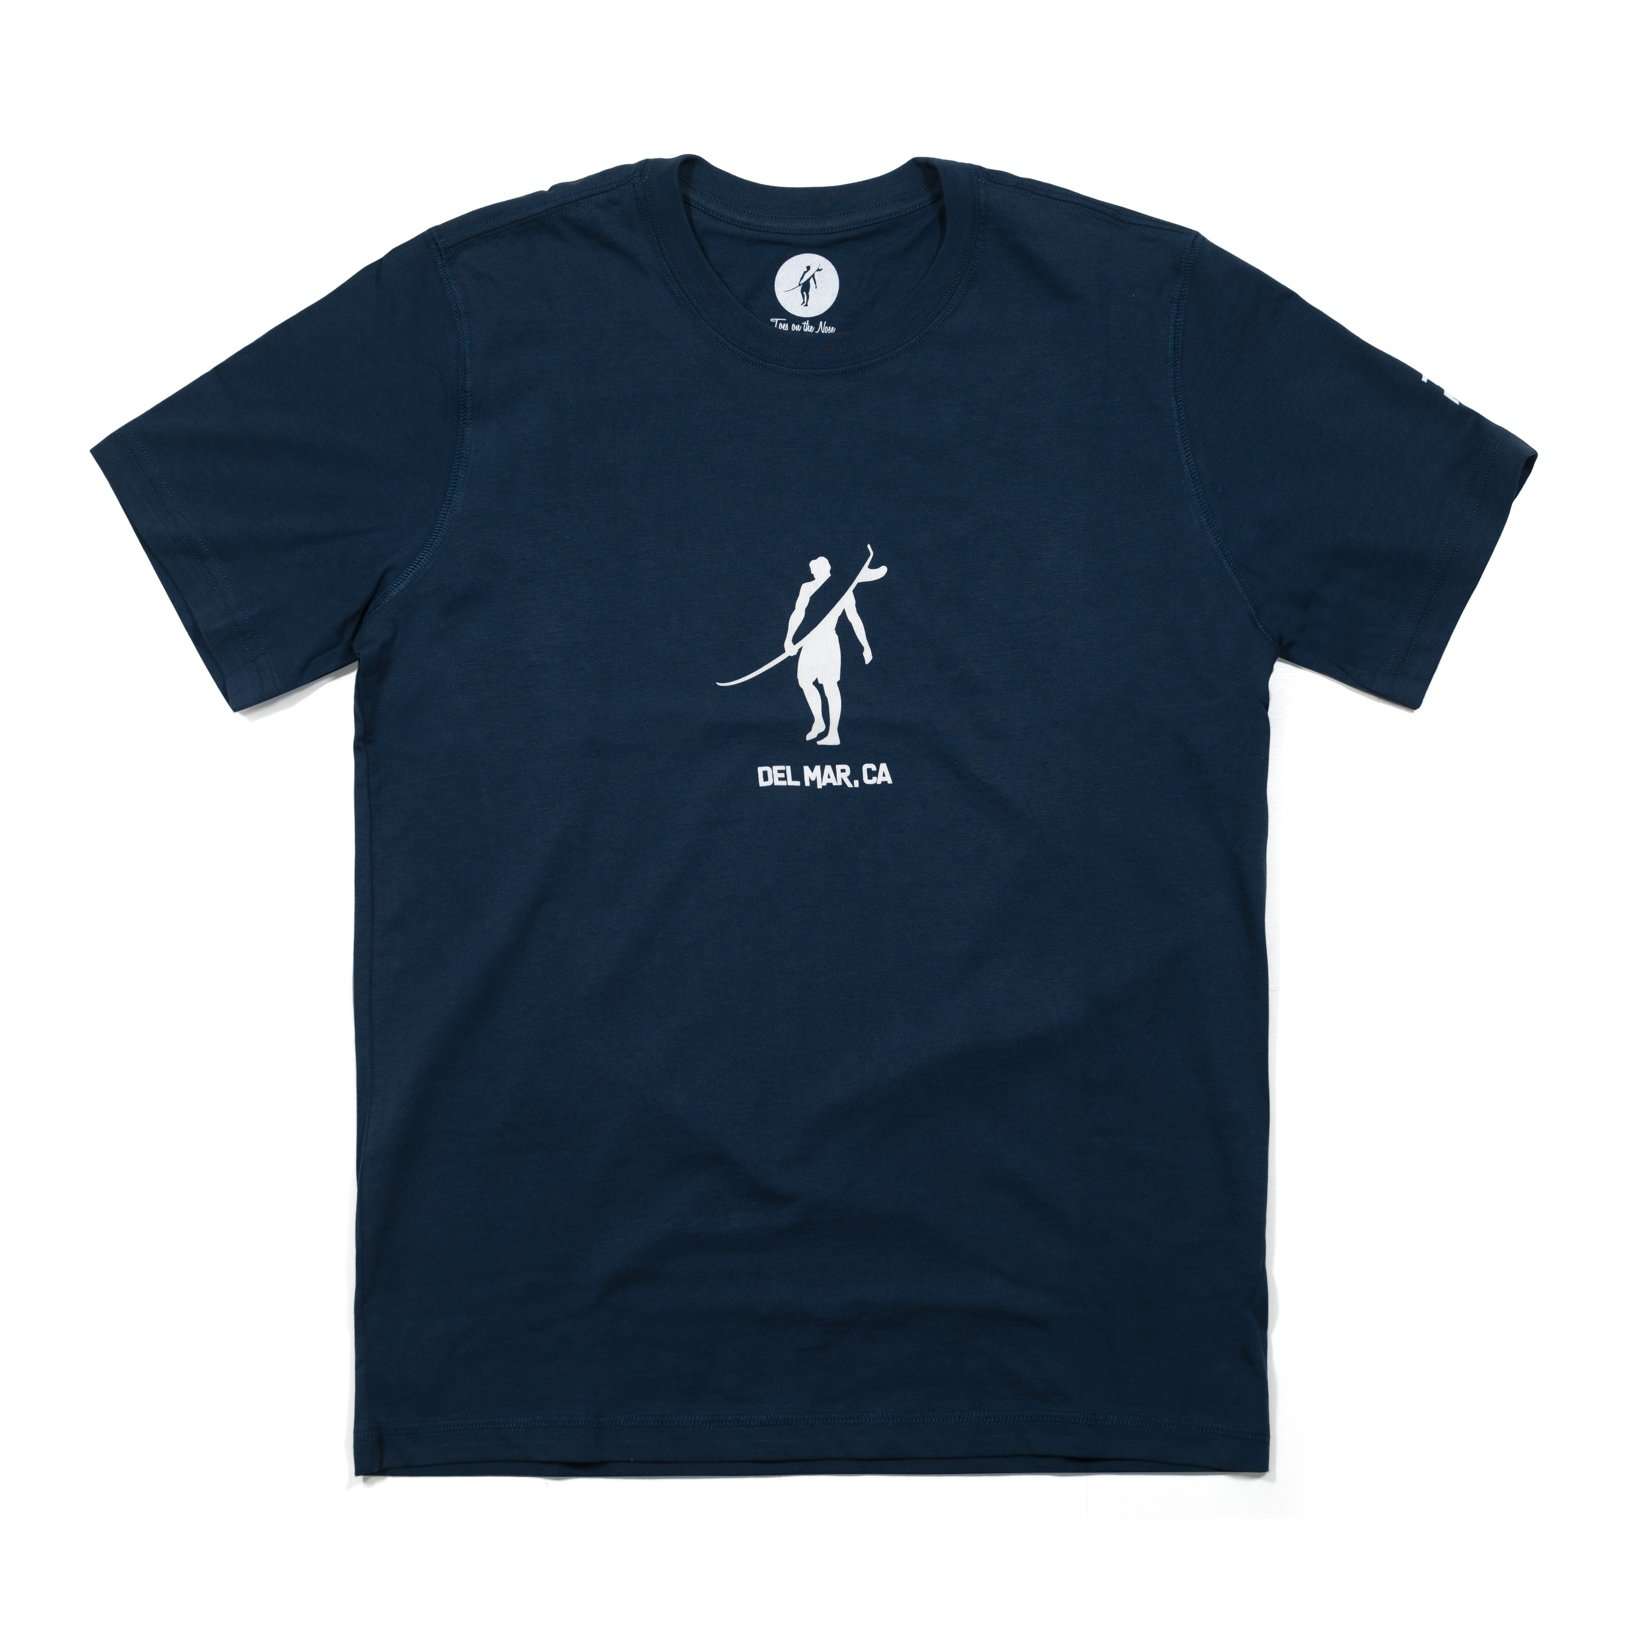 Toes on the Nose S/S T-Shirt in Navy